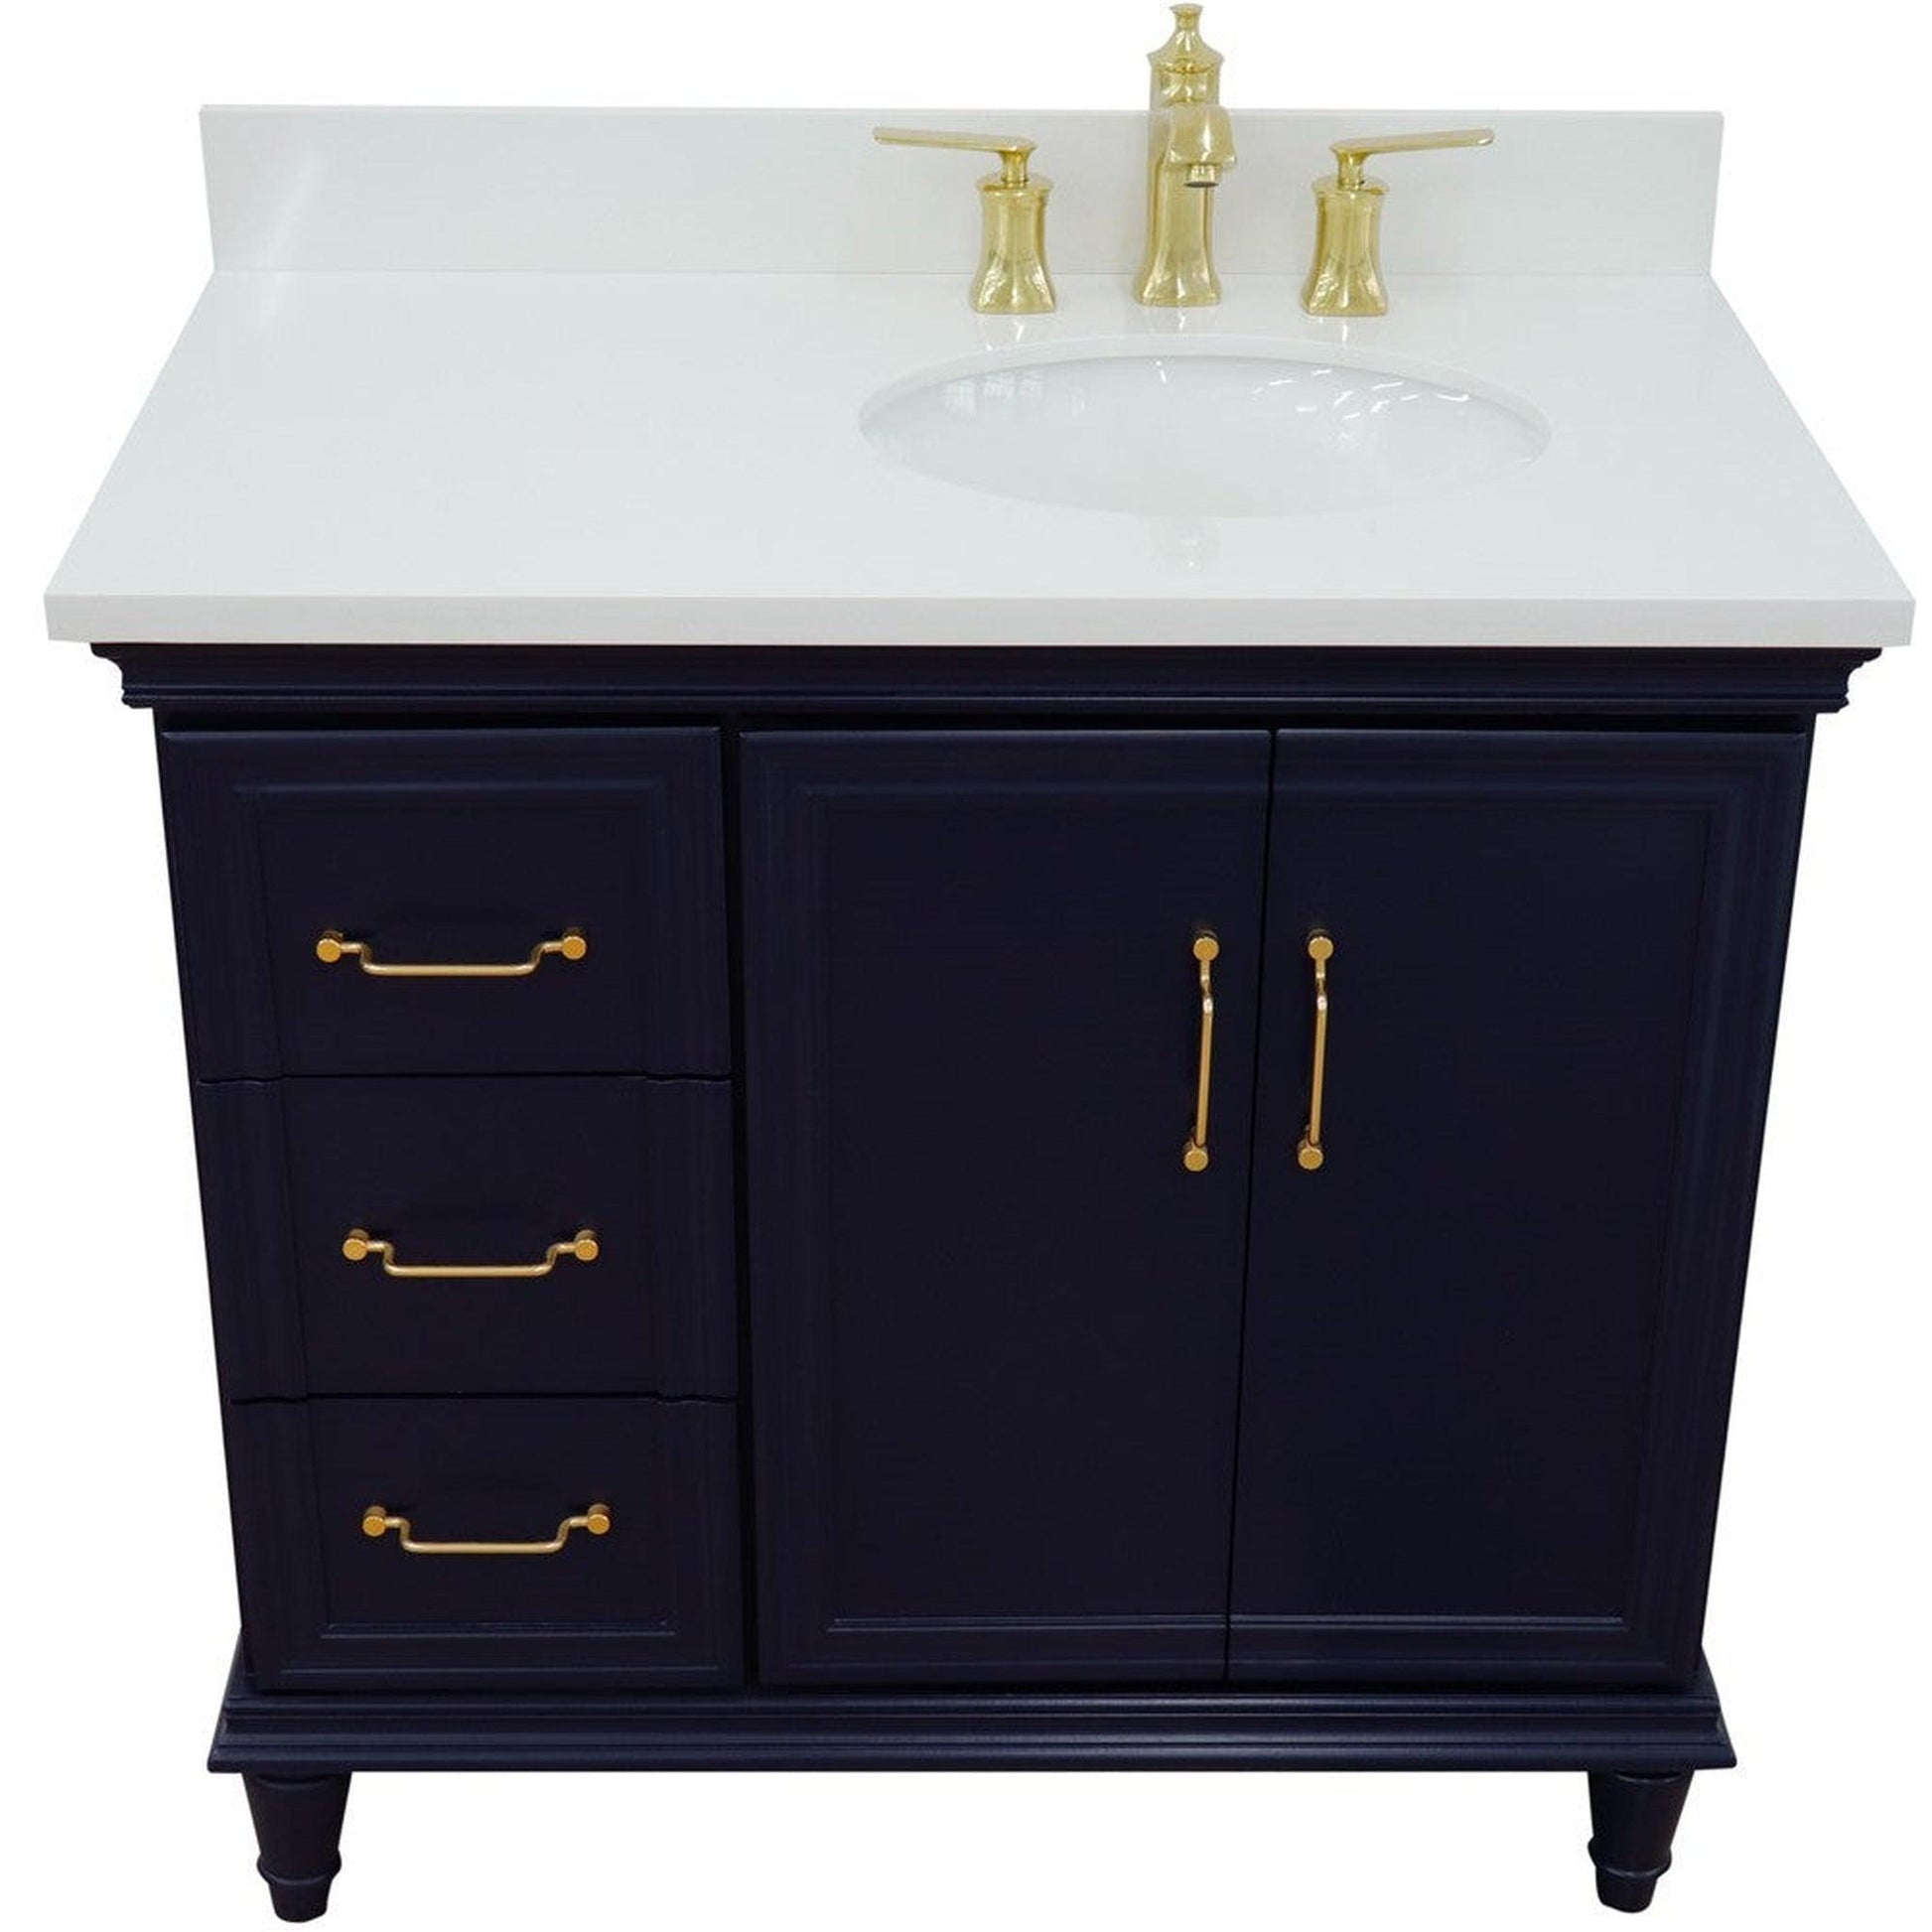 Bellaterra Home Forli 37" 2-Door 3-Drawer Blue Freestanding Vanity Set With Ceramic Right Offset Undermount Oval Sink and White Quartz Top, and Right Door Cabinet